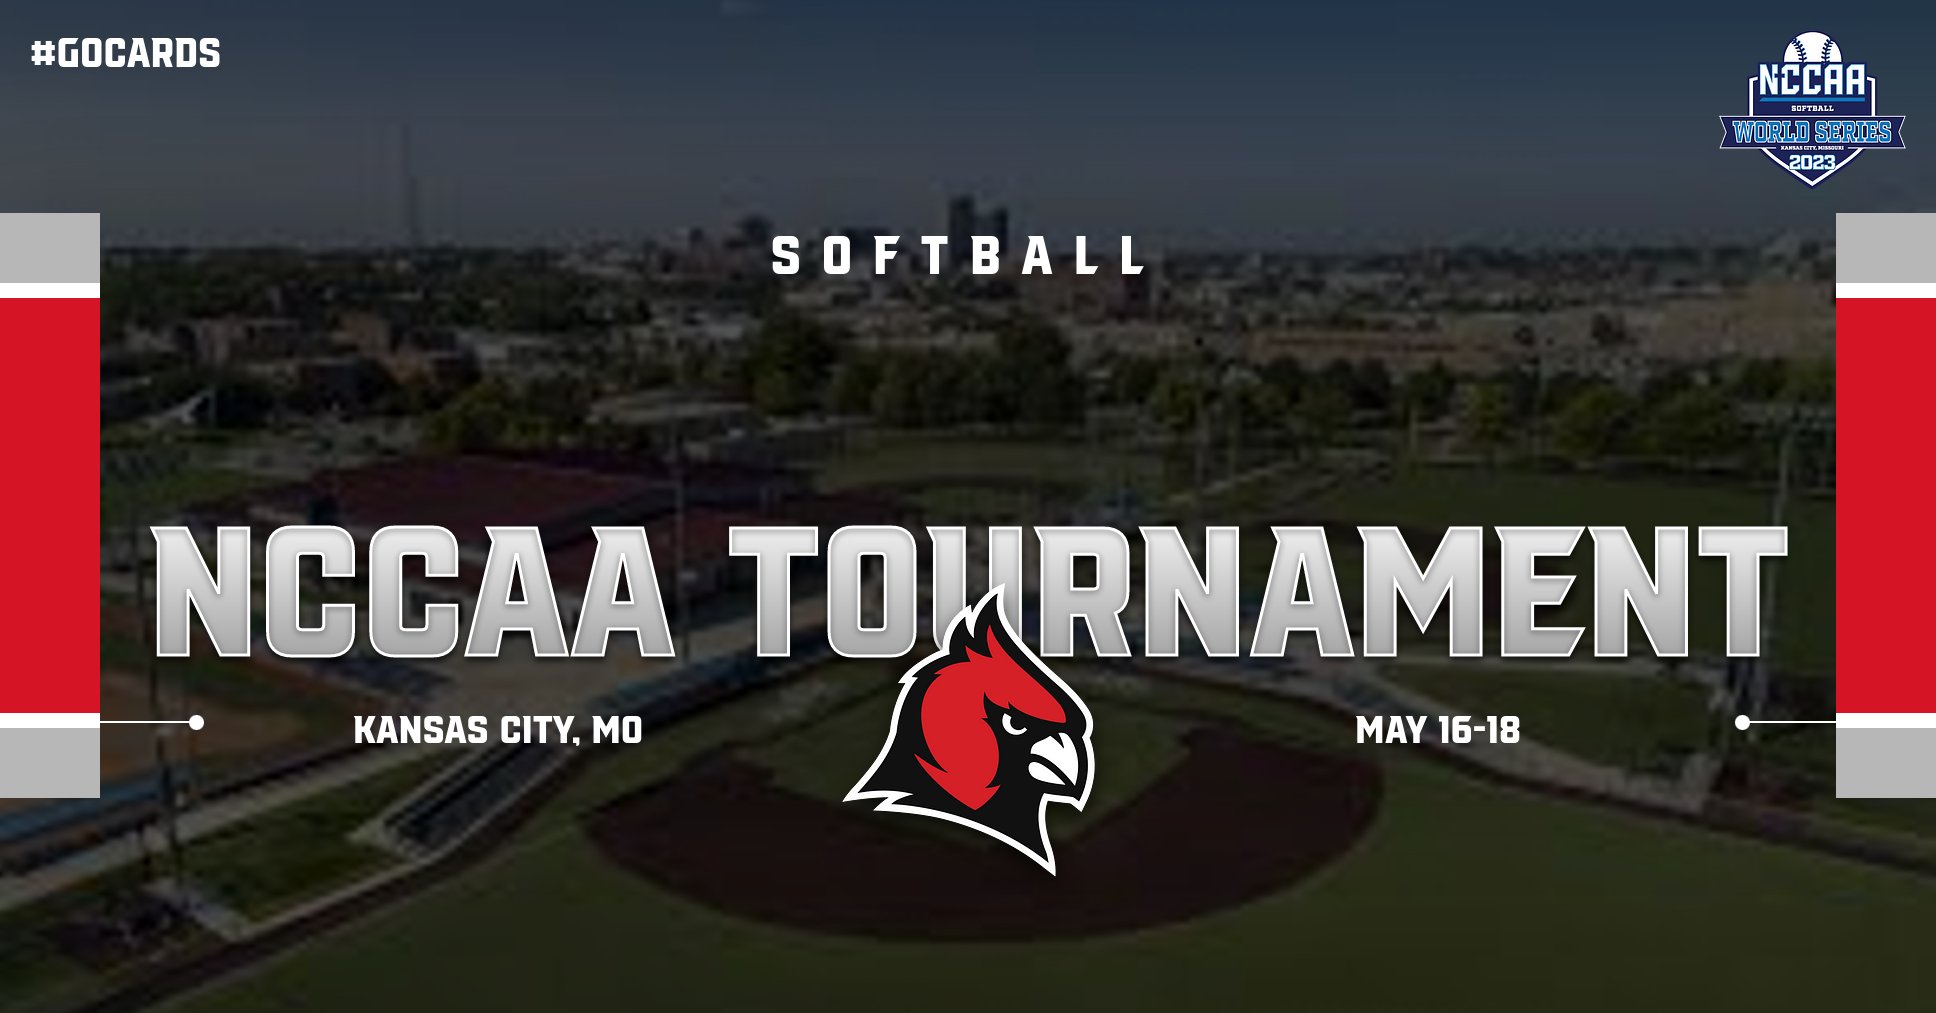 NCCAA PREVIEW: Softball set to make a run in the NCCAA Tournament